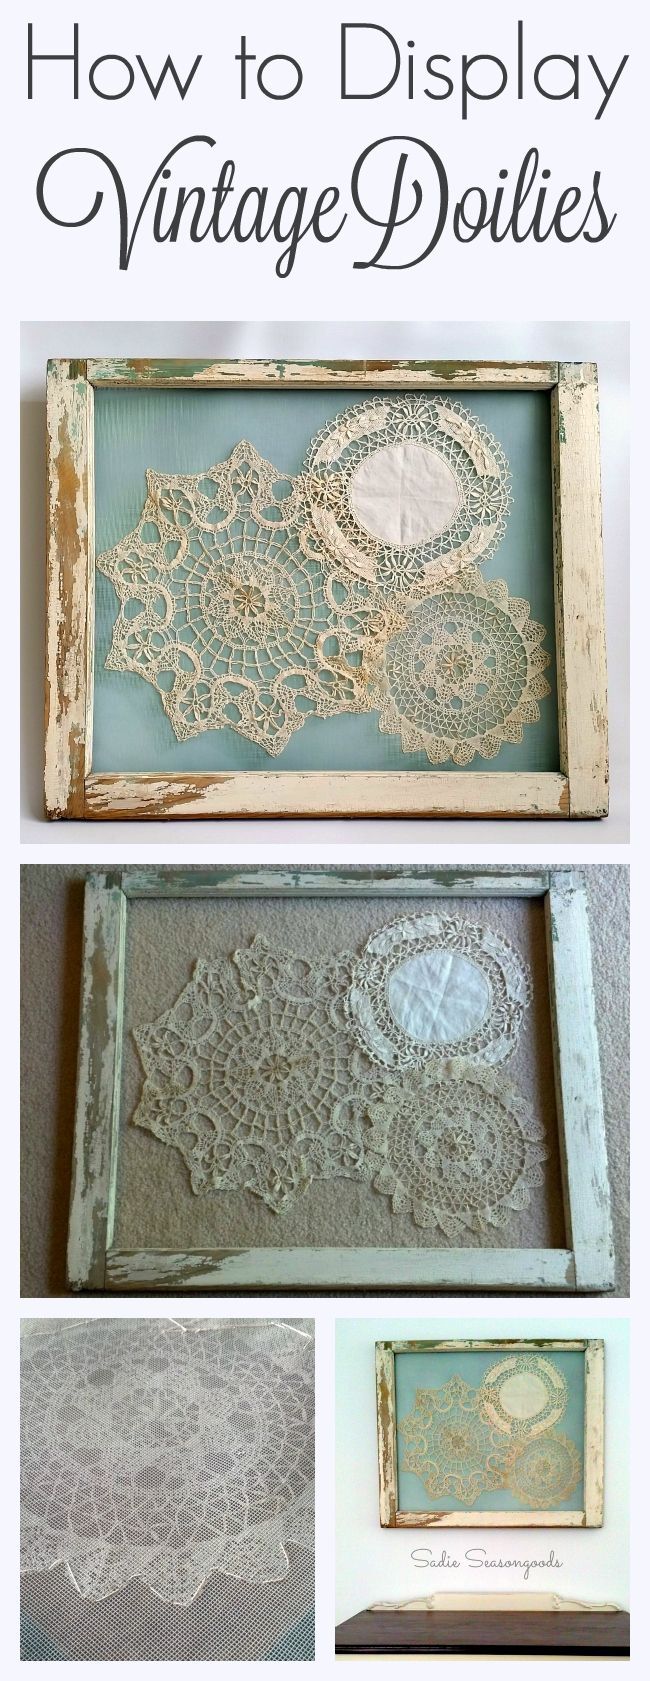 This is the BEST way to display your grandmother’s vintage crocheted doilies- gorgeously shabby chic, they